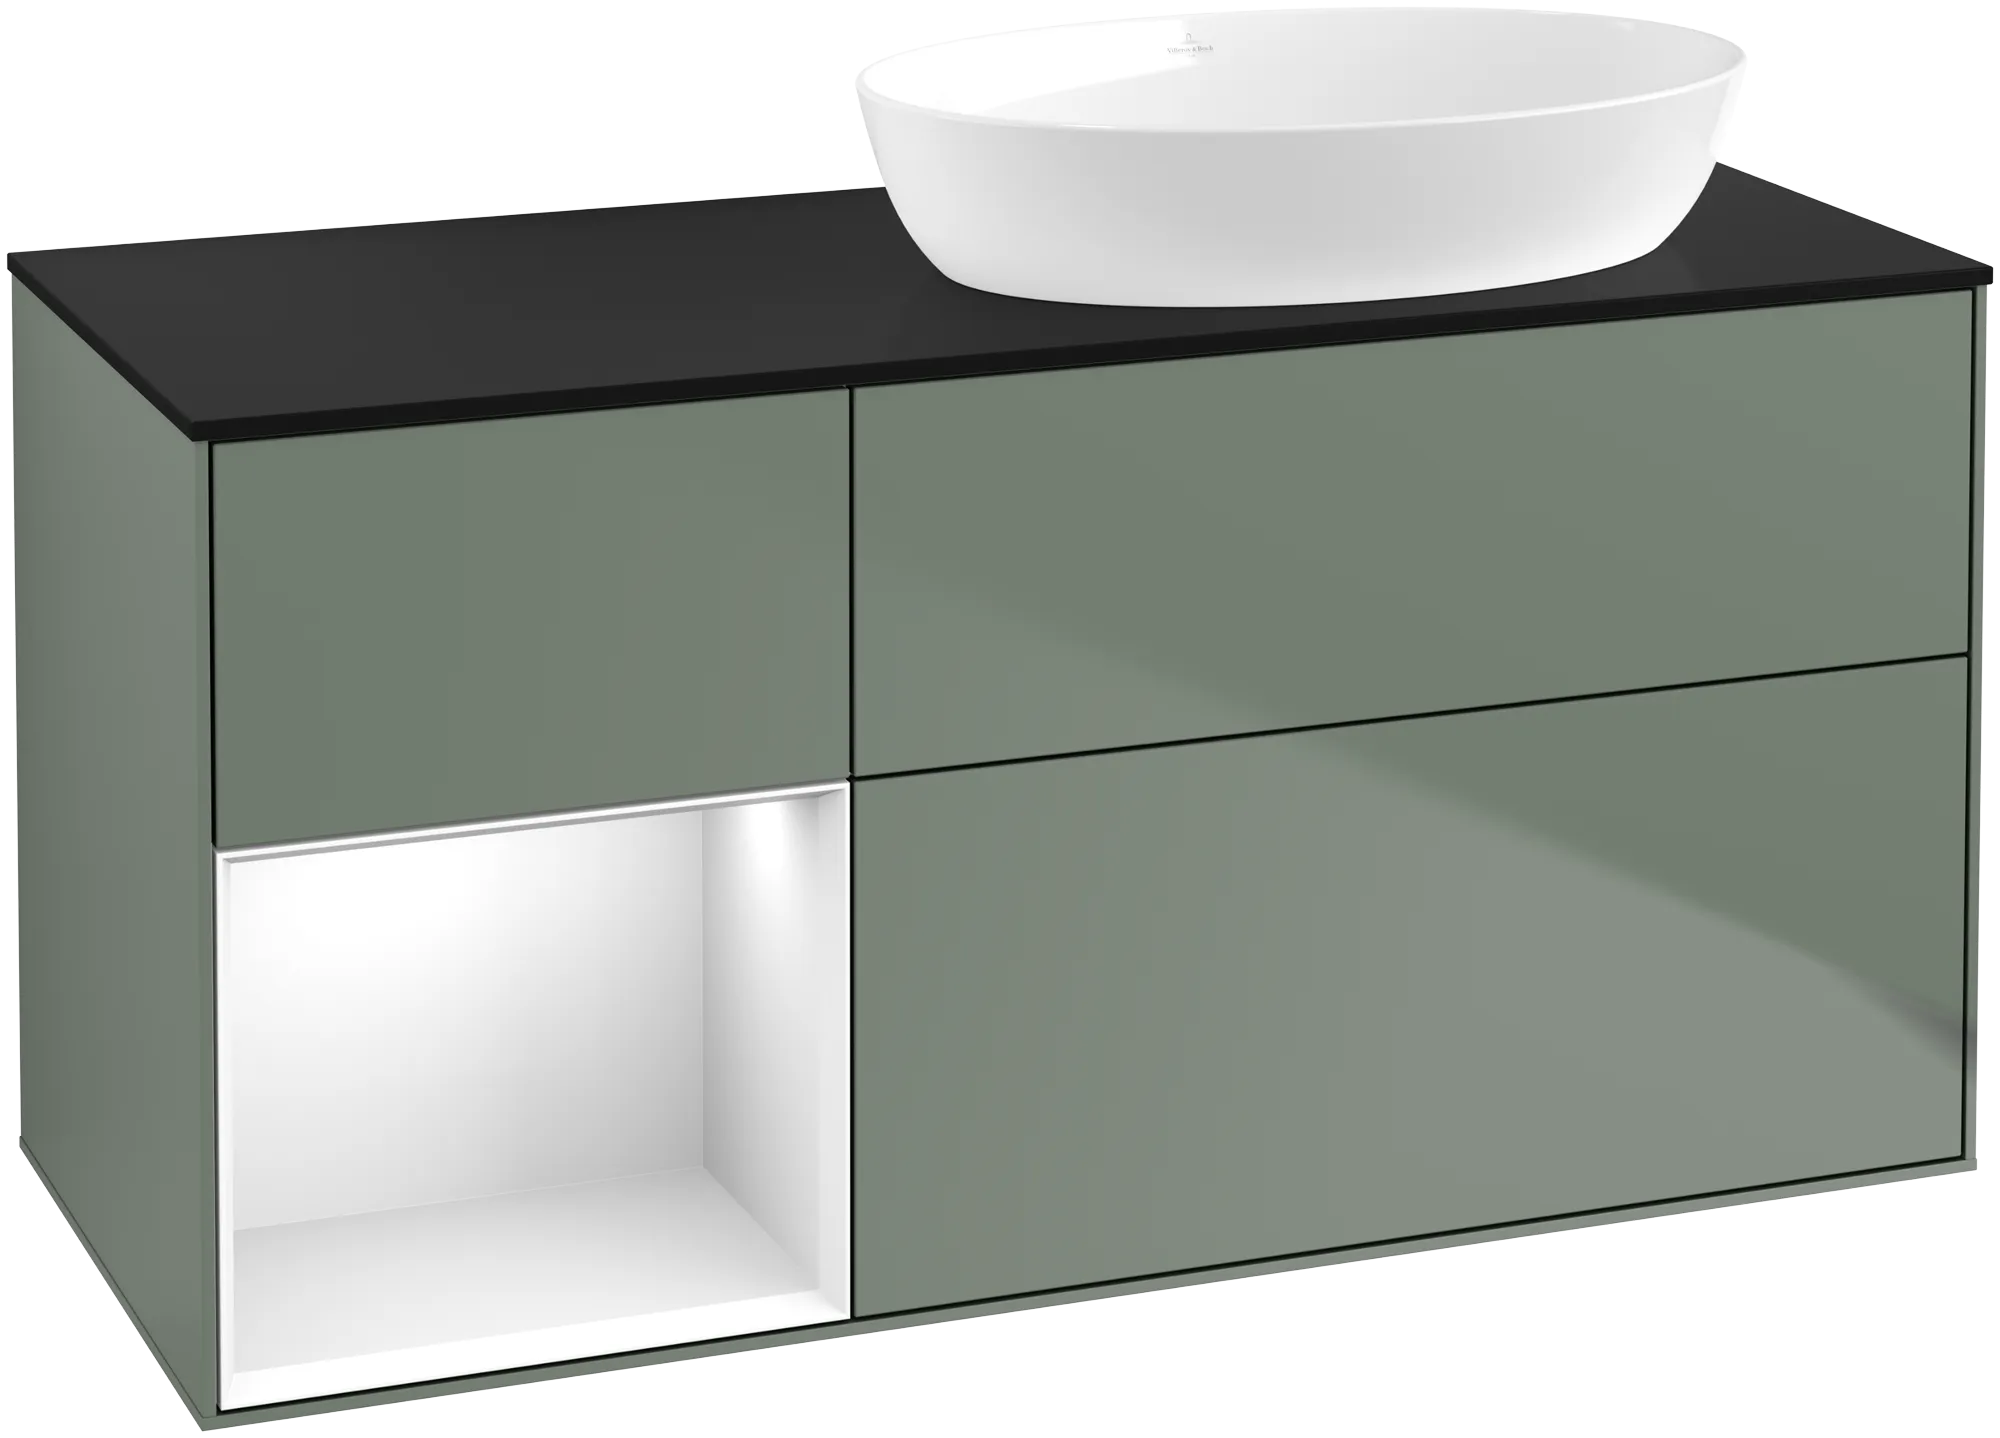 Picture of VILLEROY BOCH Finion Vanity unit, with lighting, 3 pull-out compartments, 1200 x 603 x 501 mm, Olive Matt Lacquer / Glossy White Lacquer / Glass Black Matt #GA42GFGM